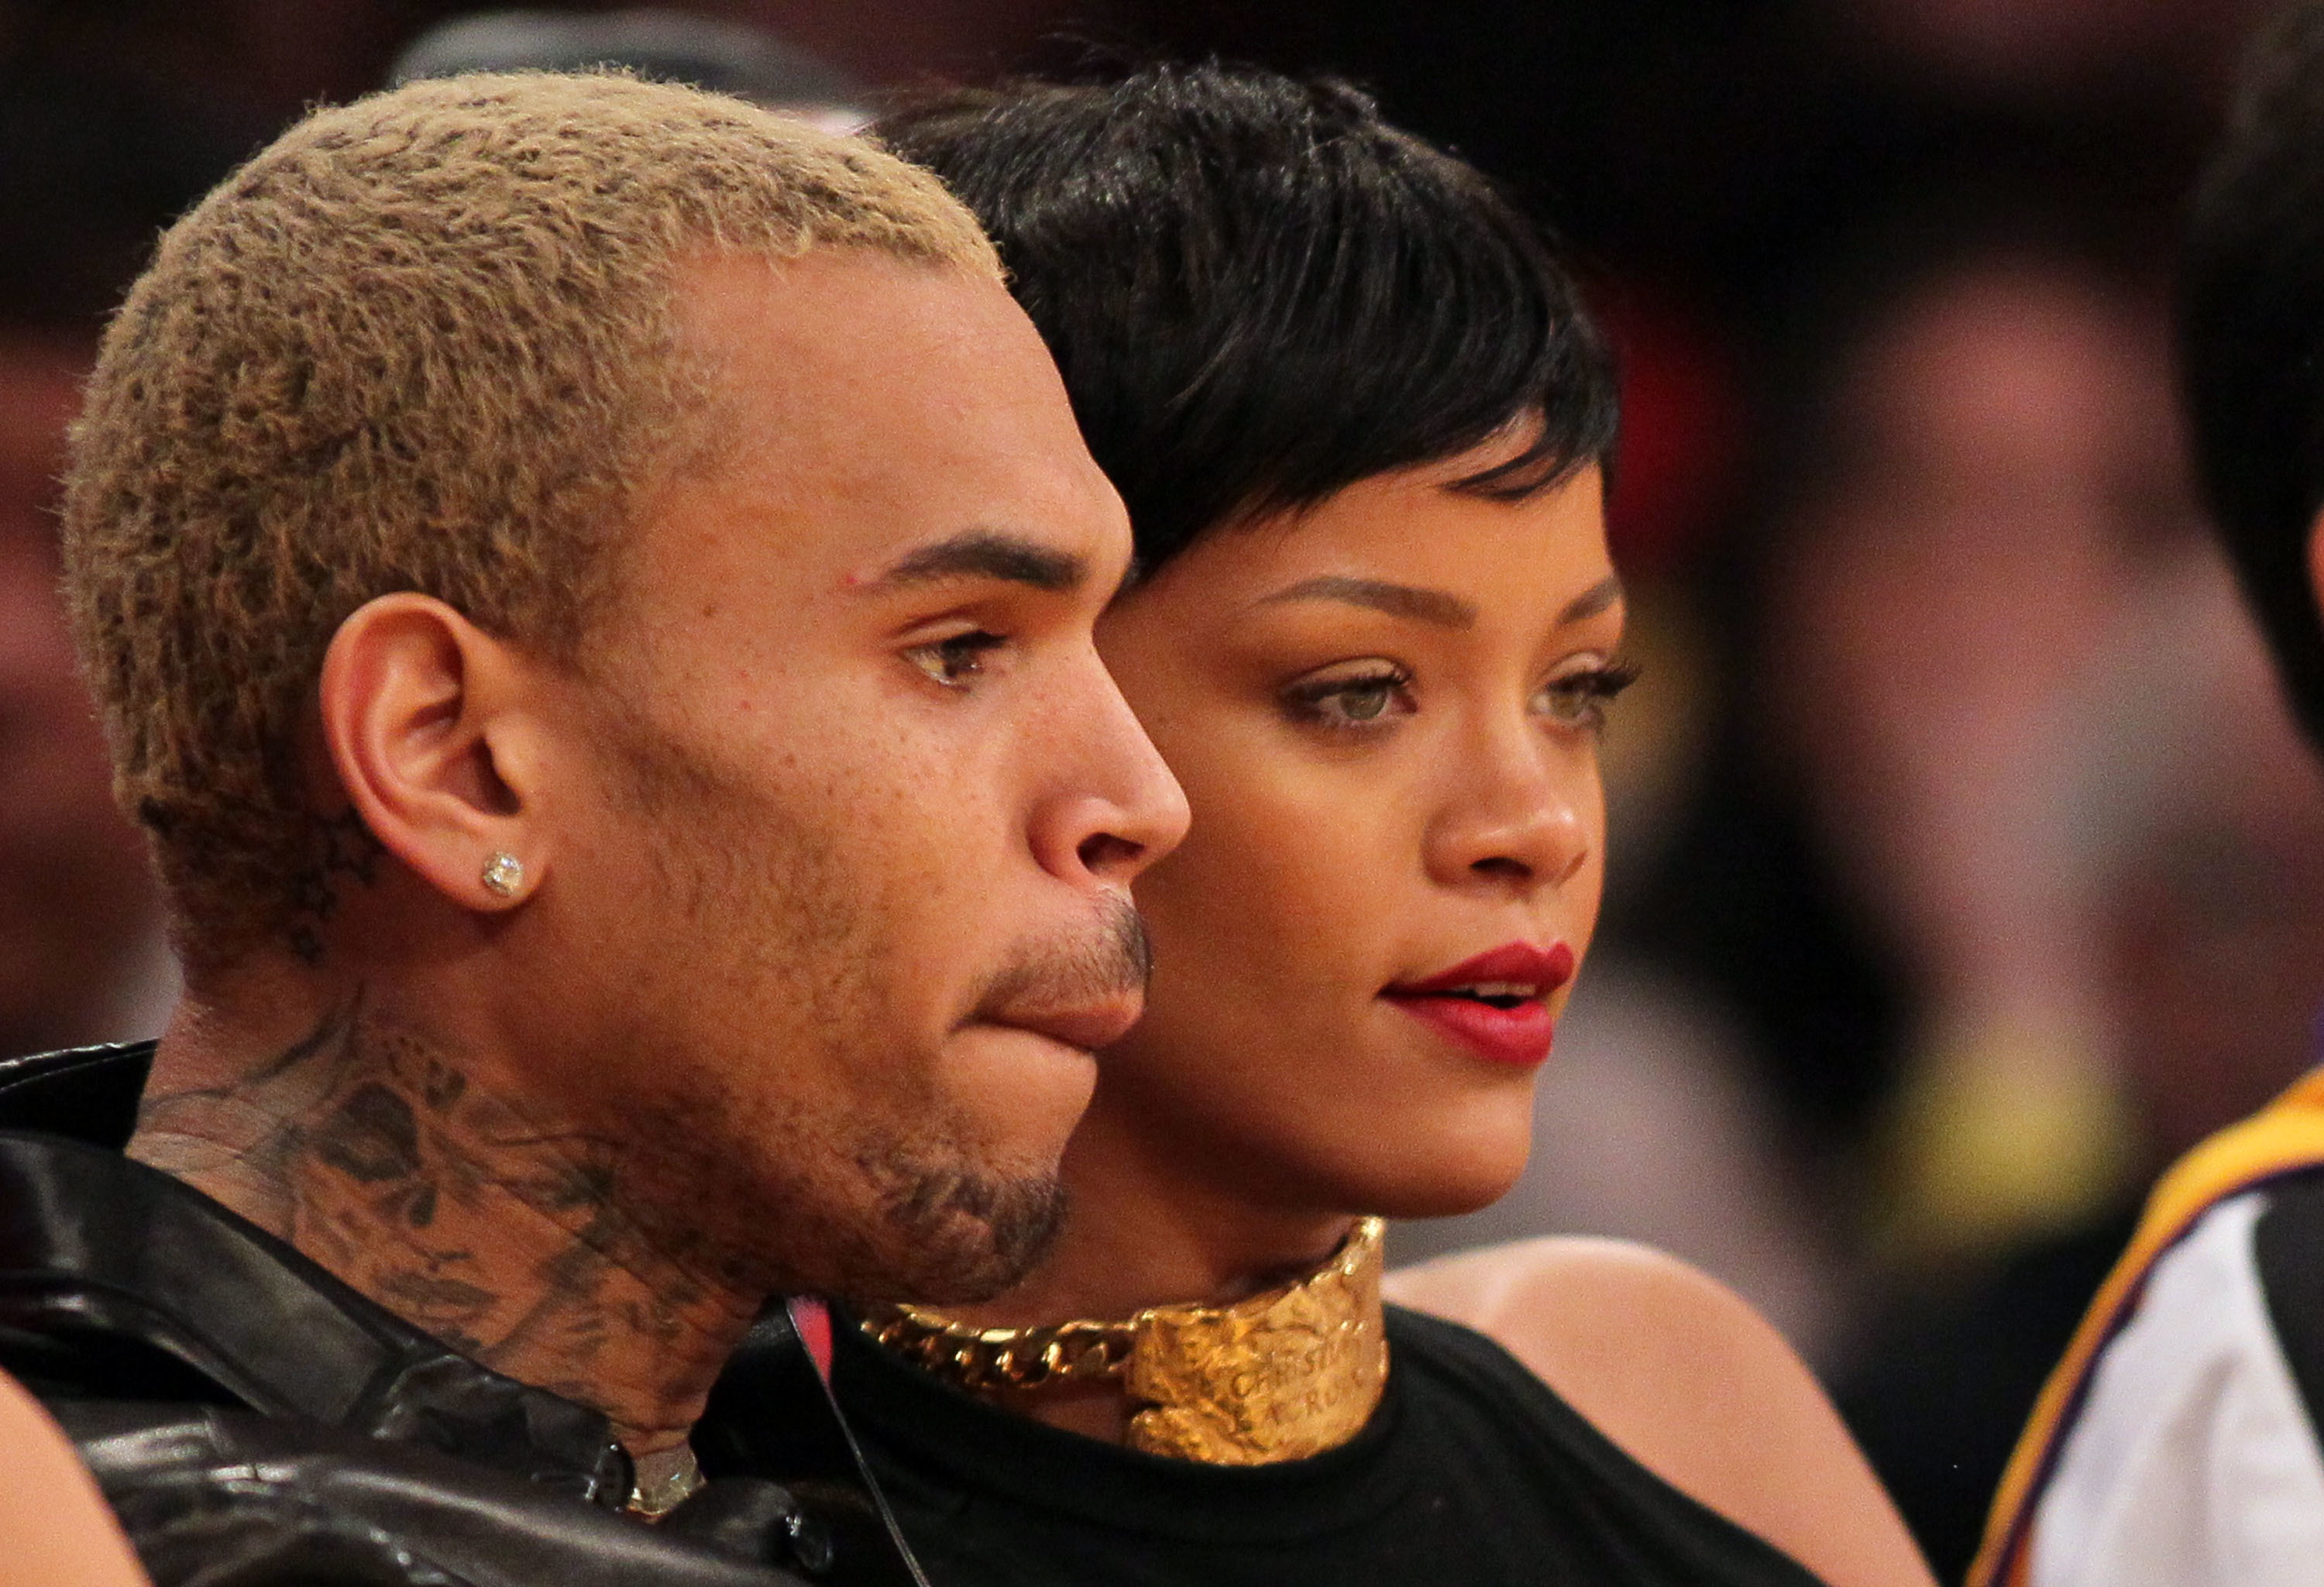 Chris Brown perms his hair...like his new look? (photos)